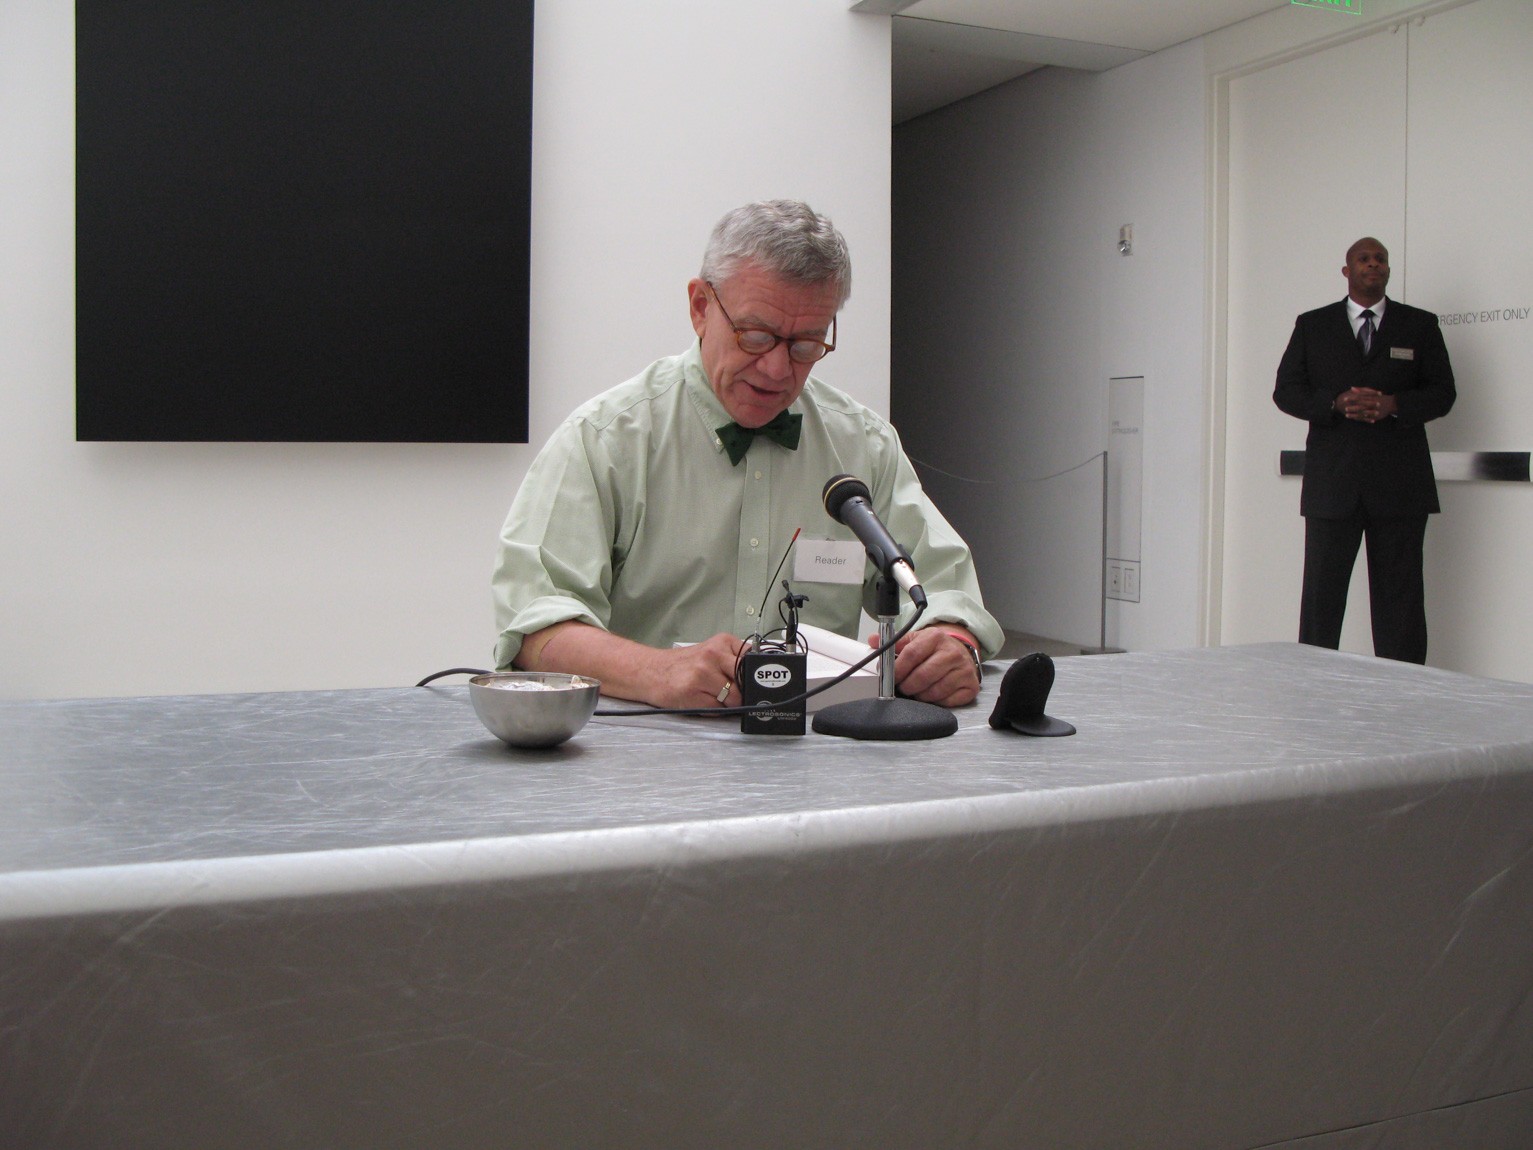 A community member sits at a table in front of Ellsworth Kelly's "Blue Black" and reads from a page into a microphone.